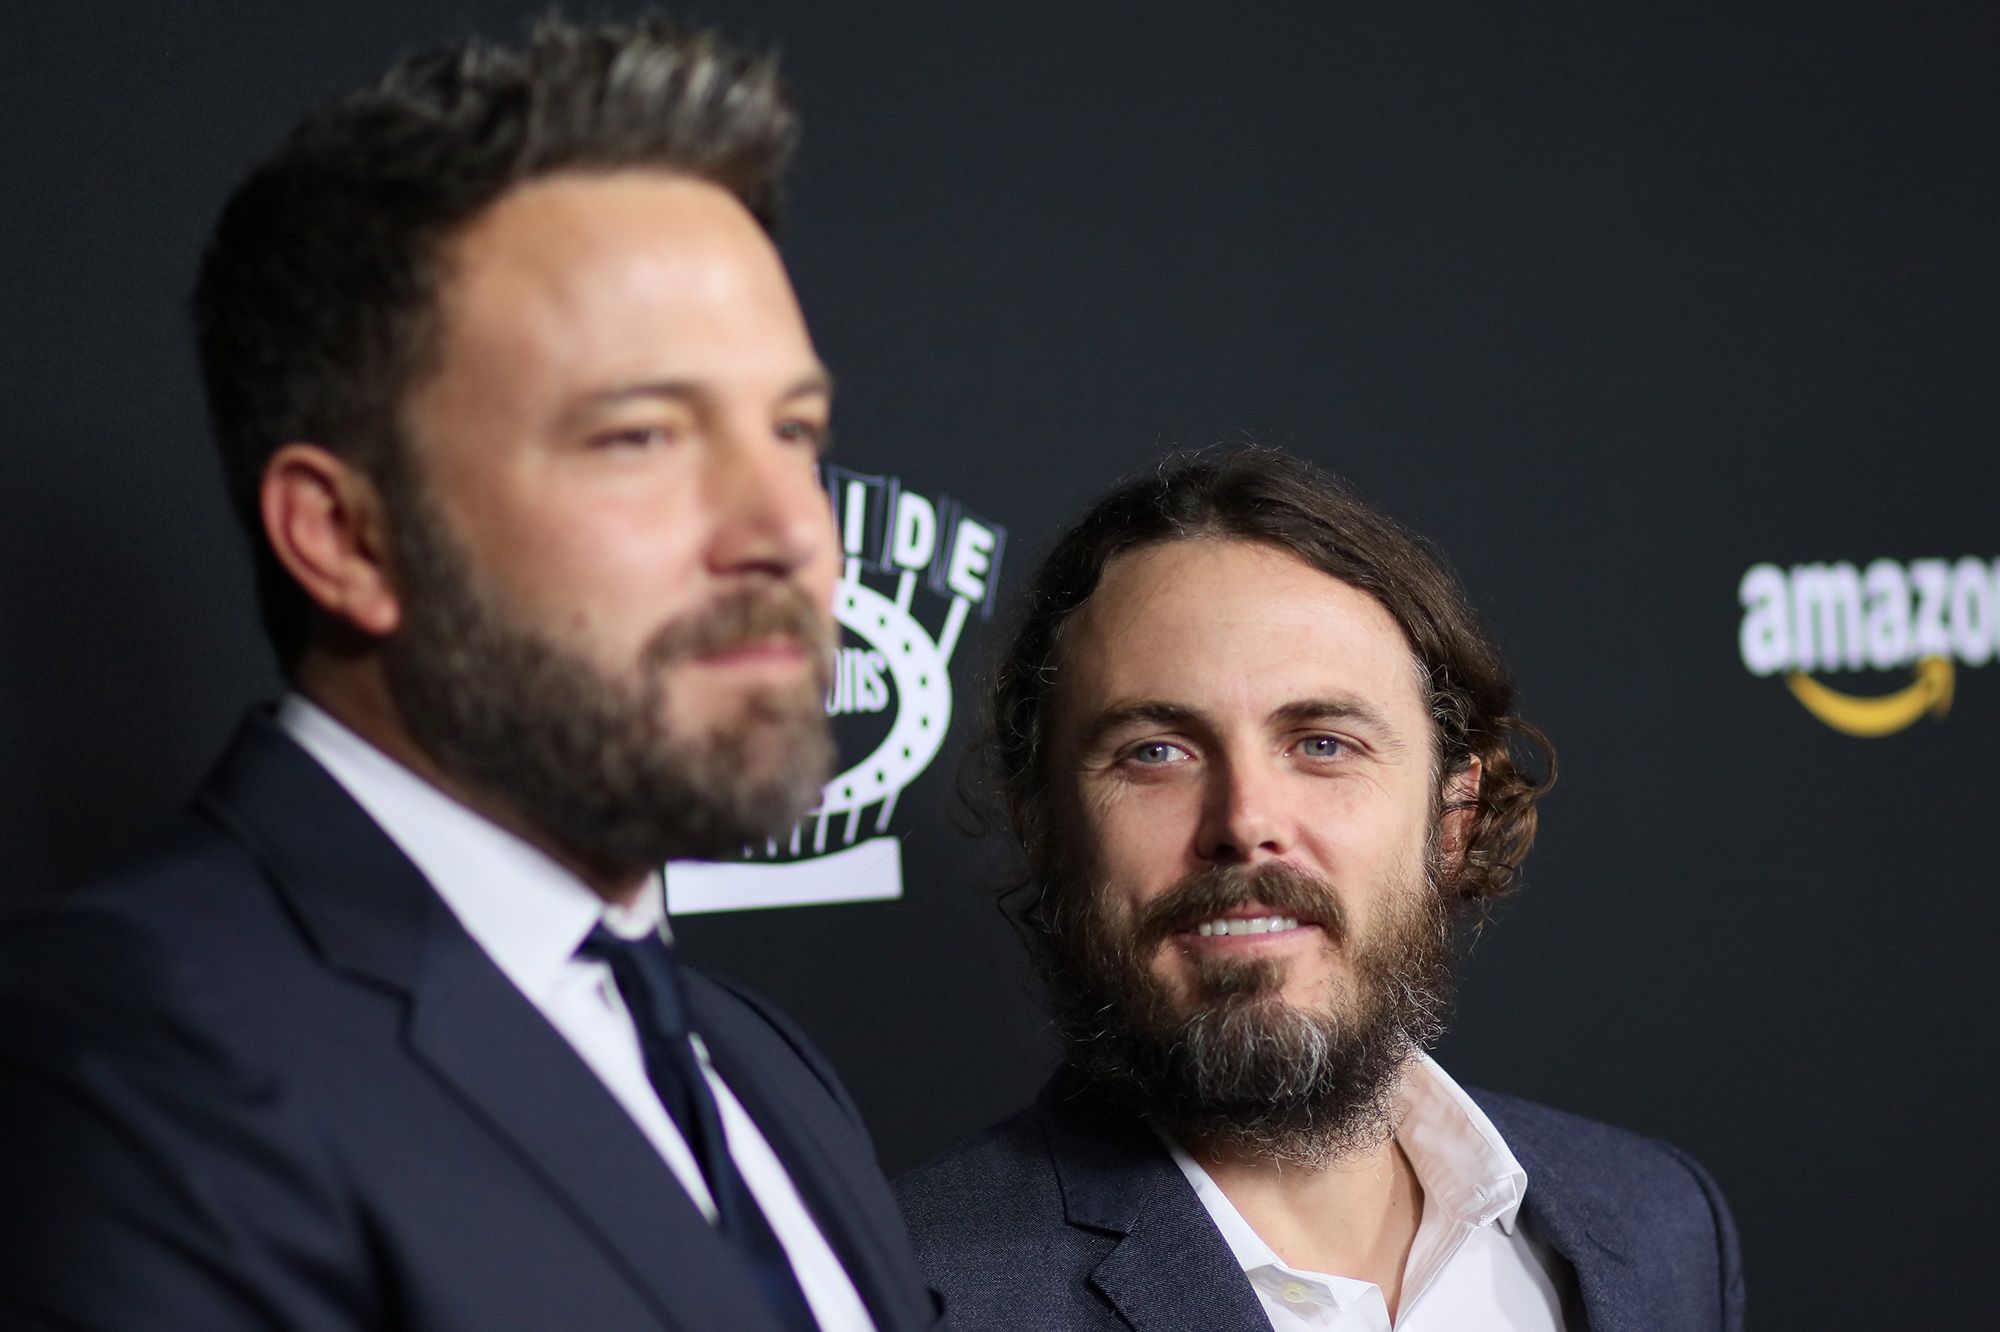 Casey Affleck with his brother Ben Affleck at an event